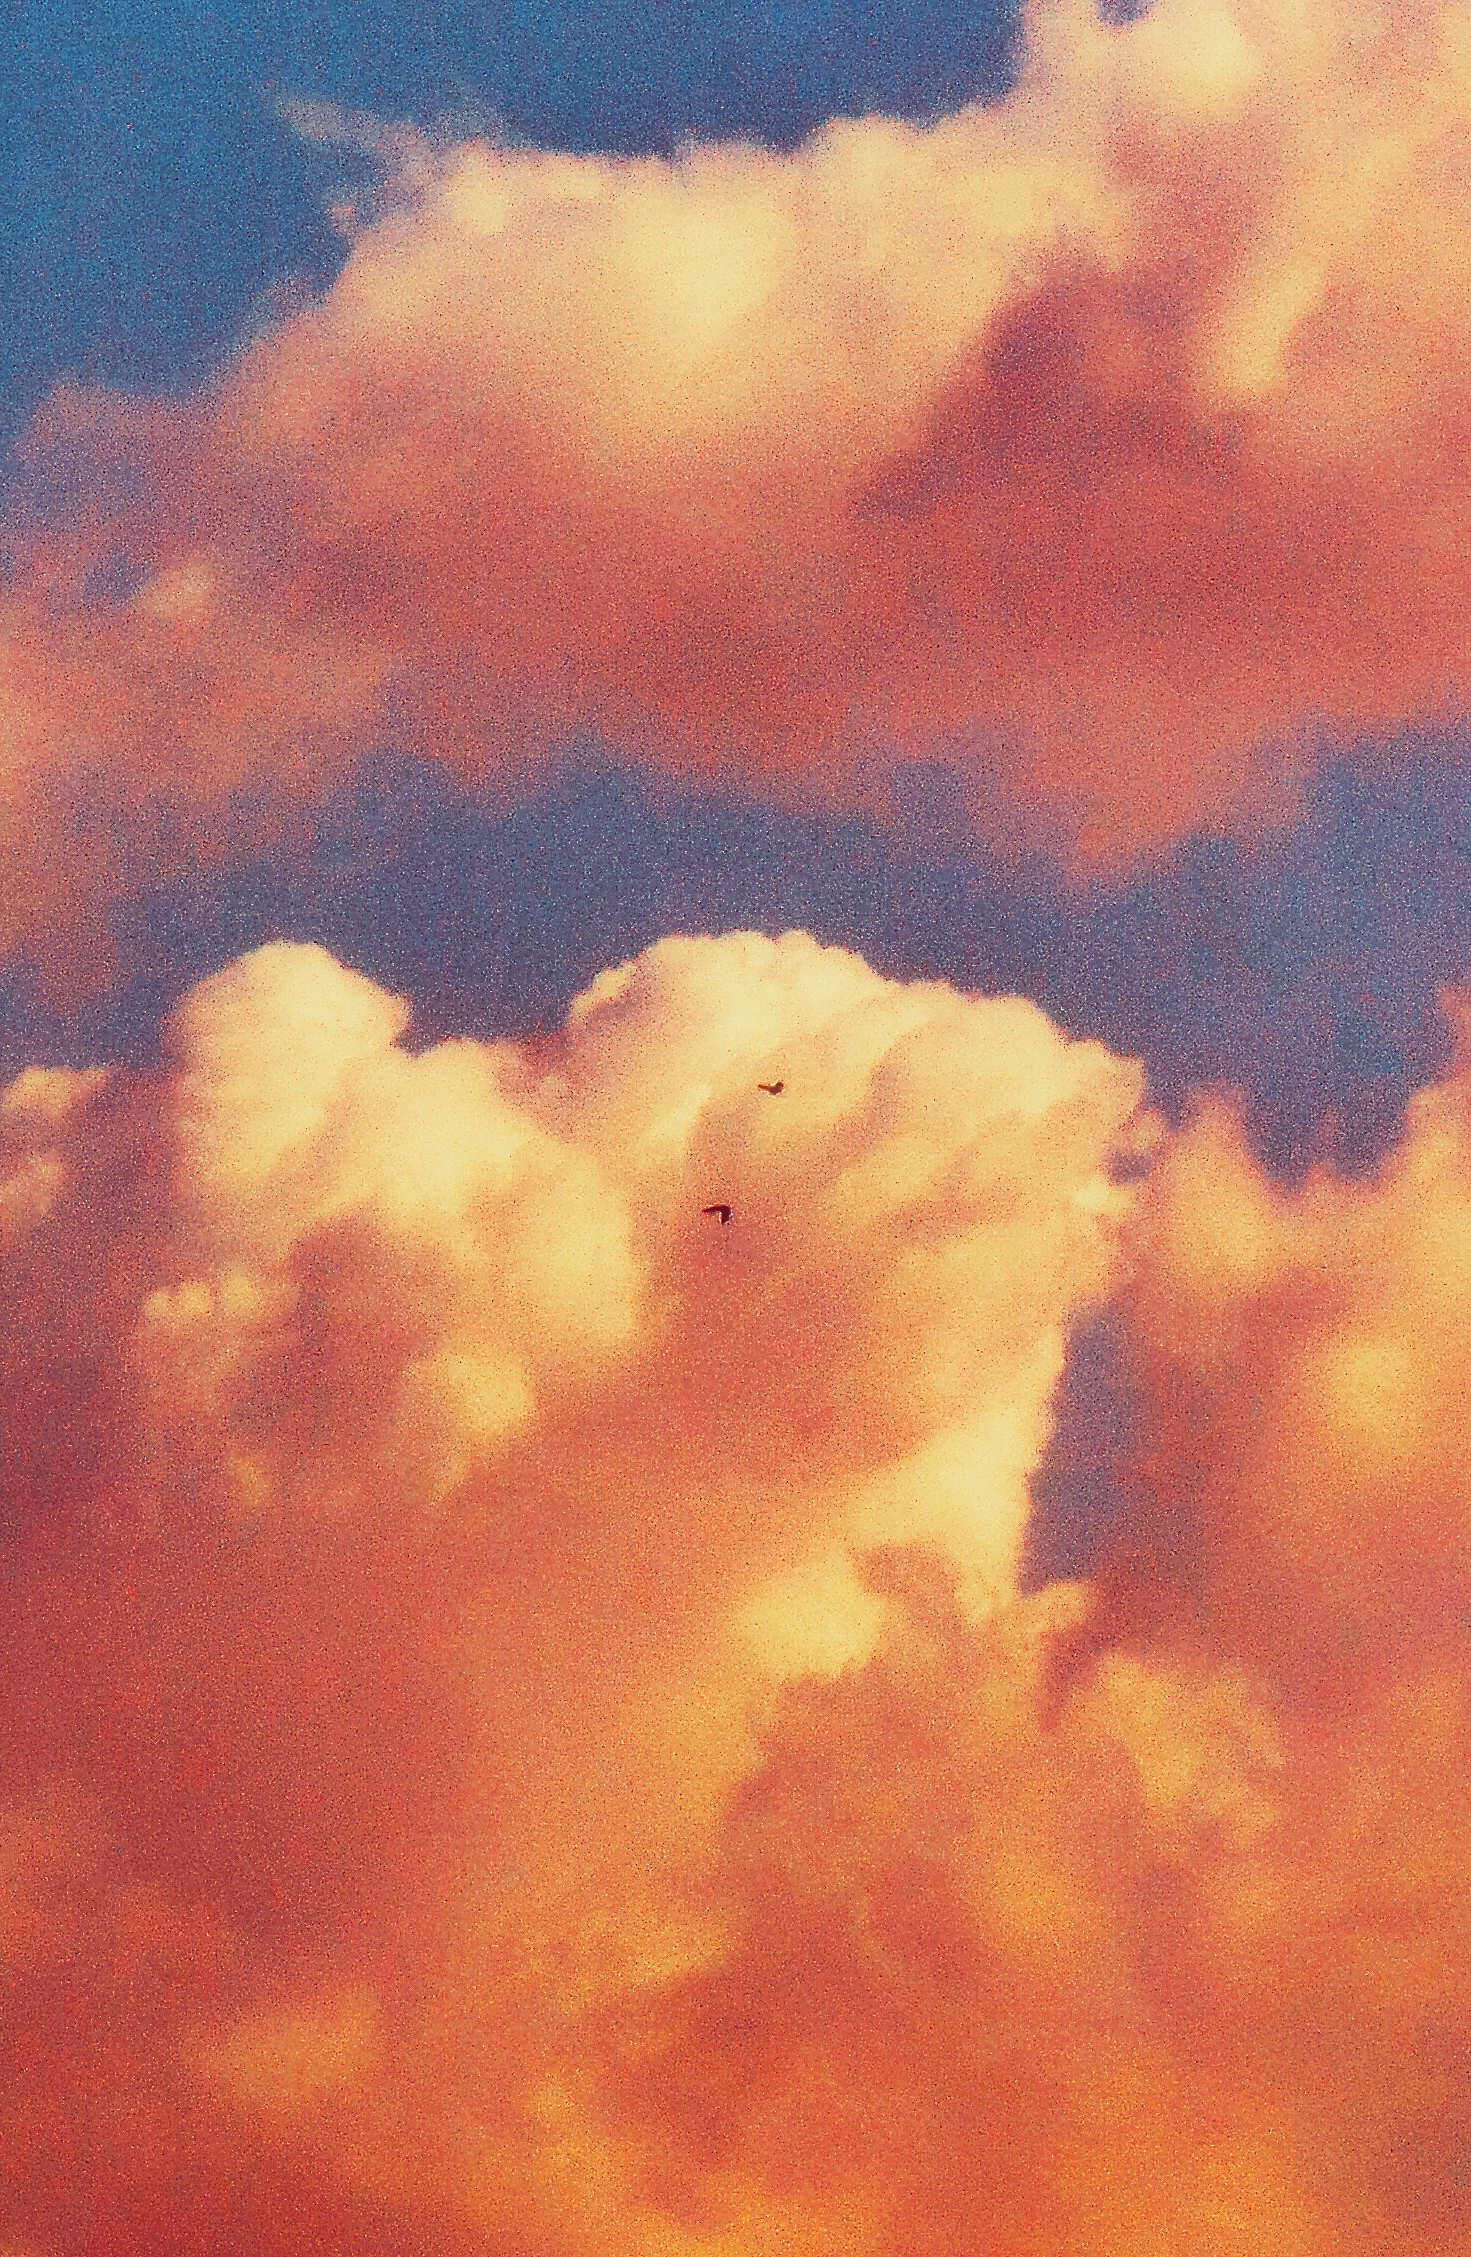 Closeup of clouds during sunset with two birds flying around